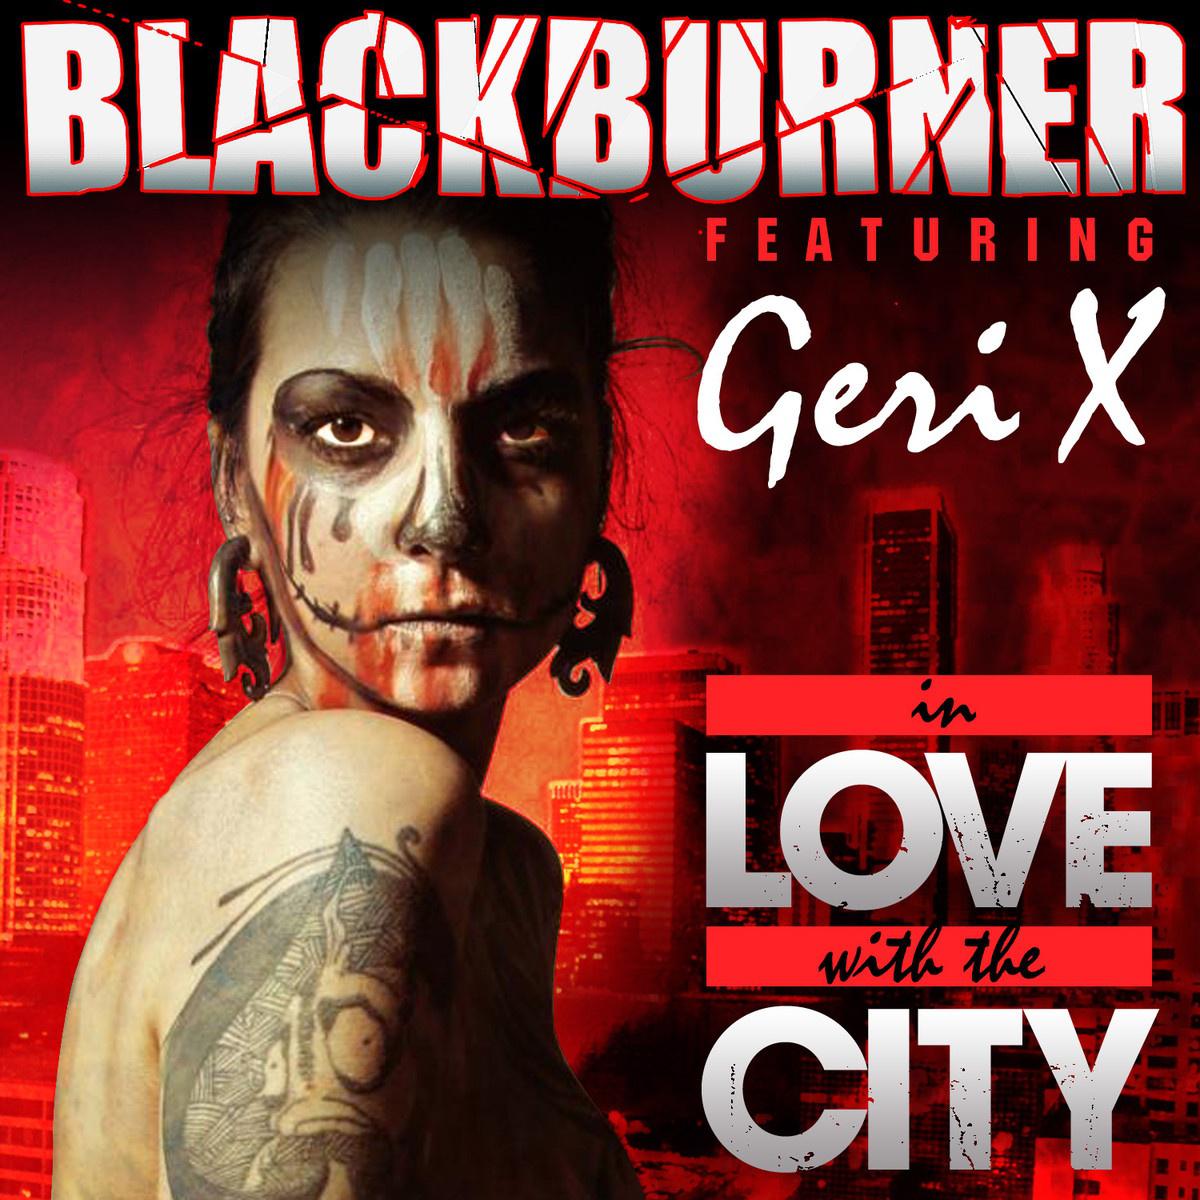 Blackburner - In Love With the City (High Top Kicks Remix)